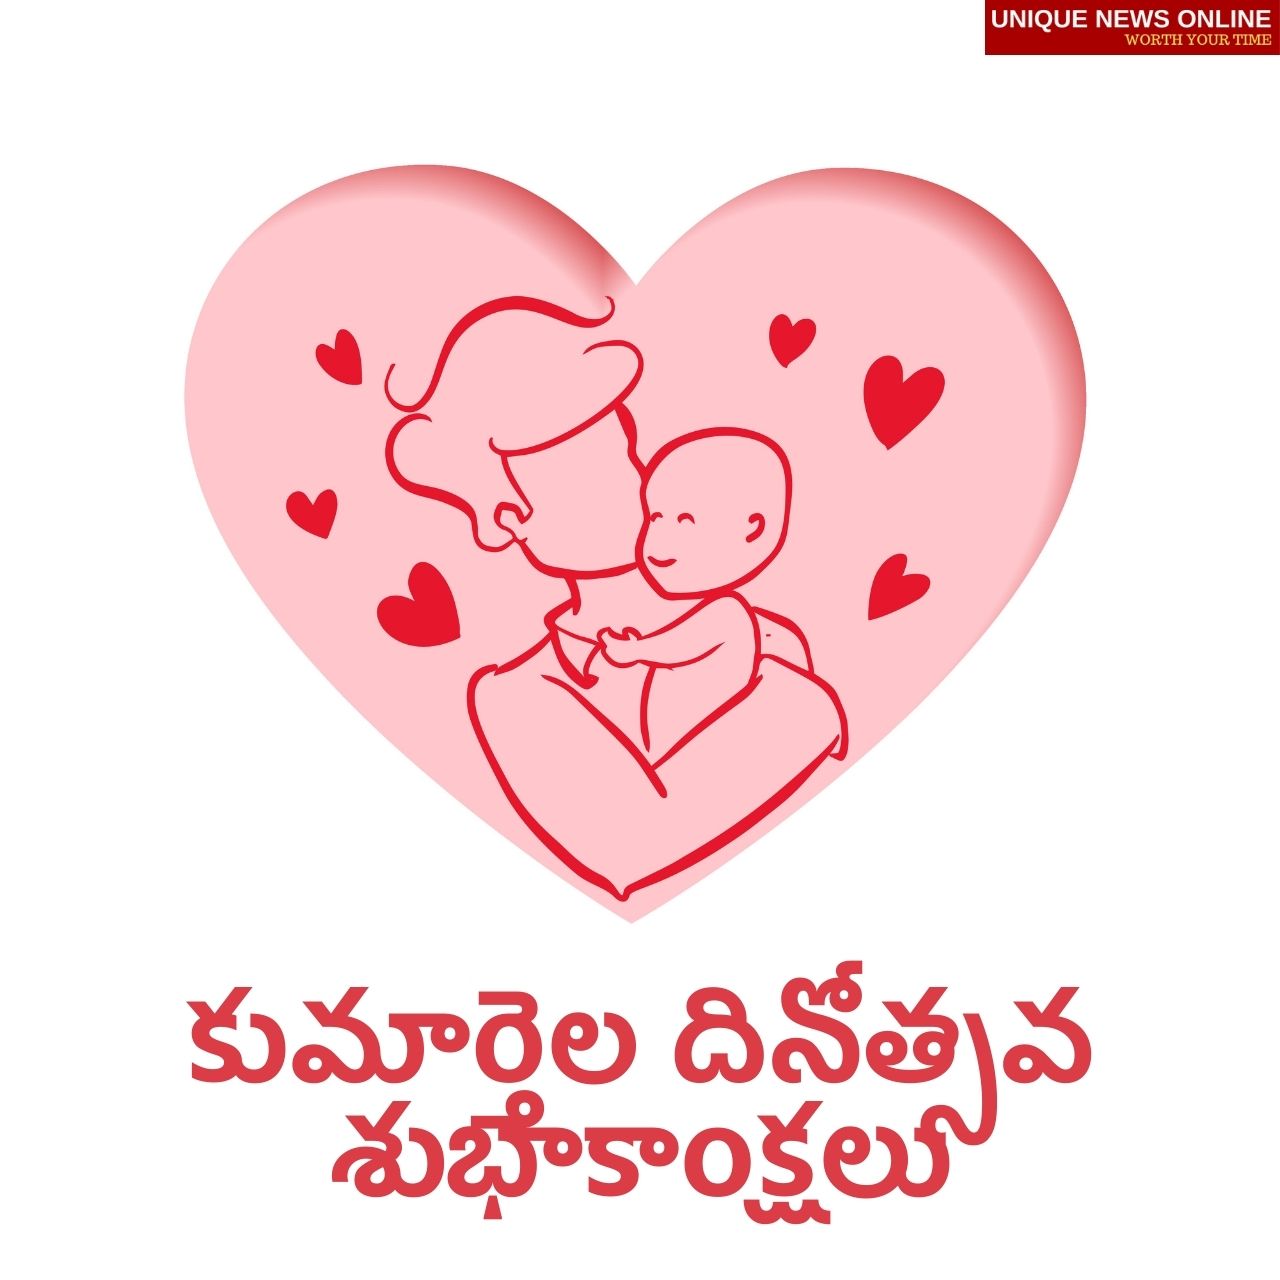 Happy Daughters Day 2021 Telugu Wishes, Greetings, Messages, Shayari, Quotes, and HD Images to Share